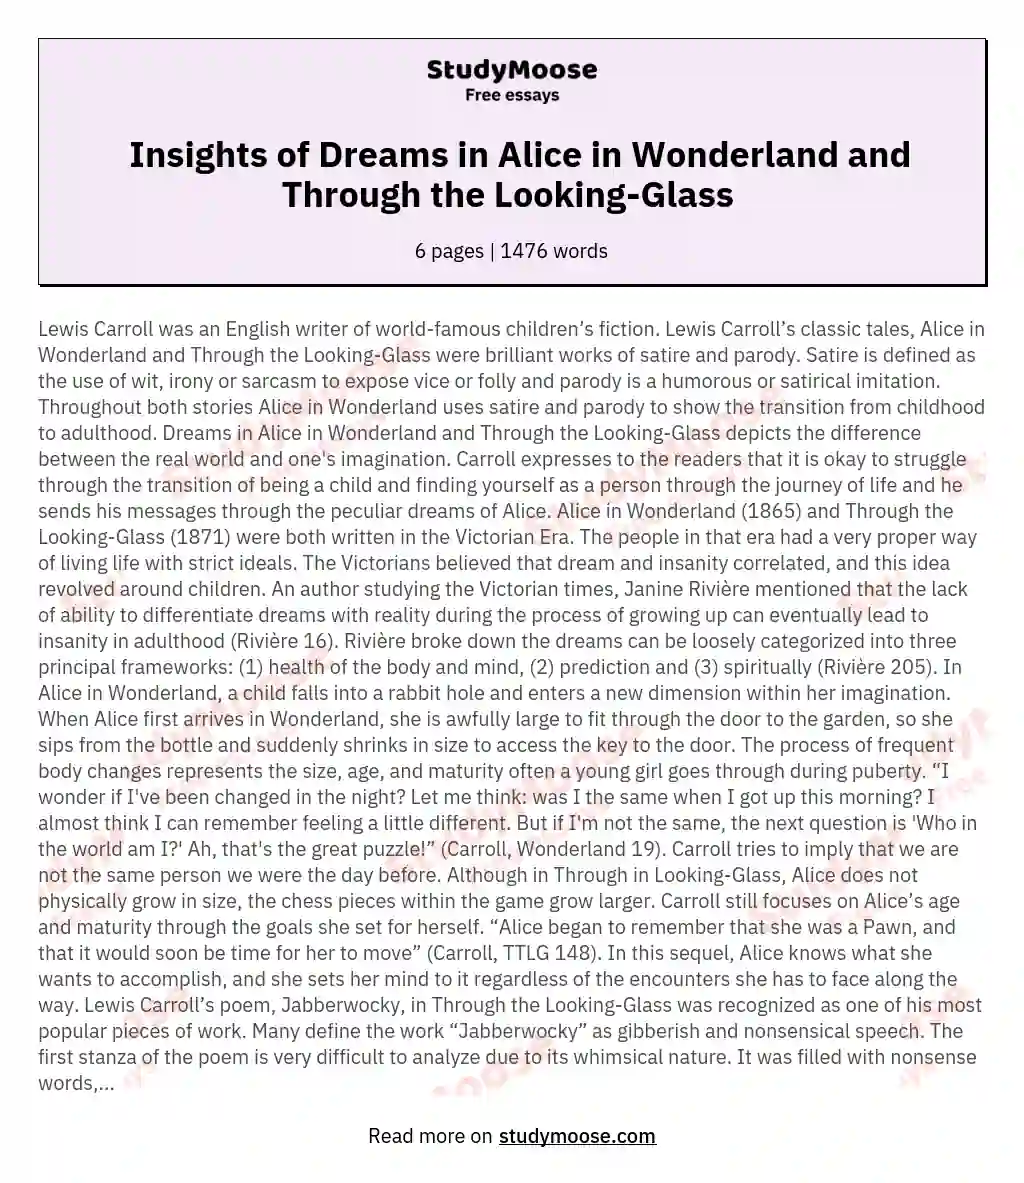   Insights of Dreams in Alice in Wonderland and Through the Looking-Glass  essay